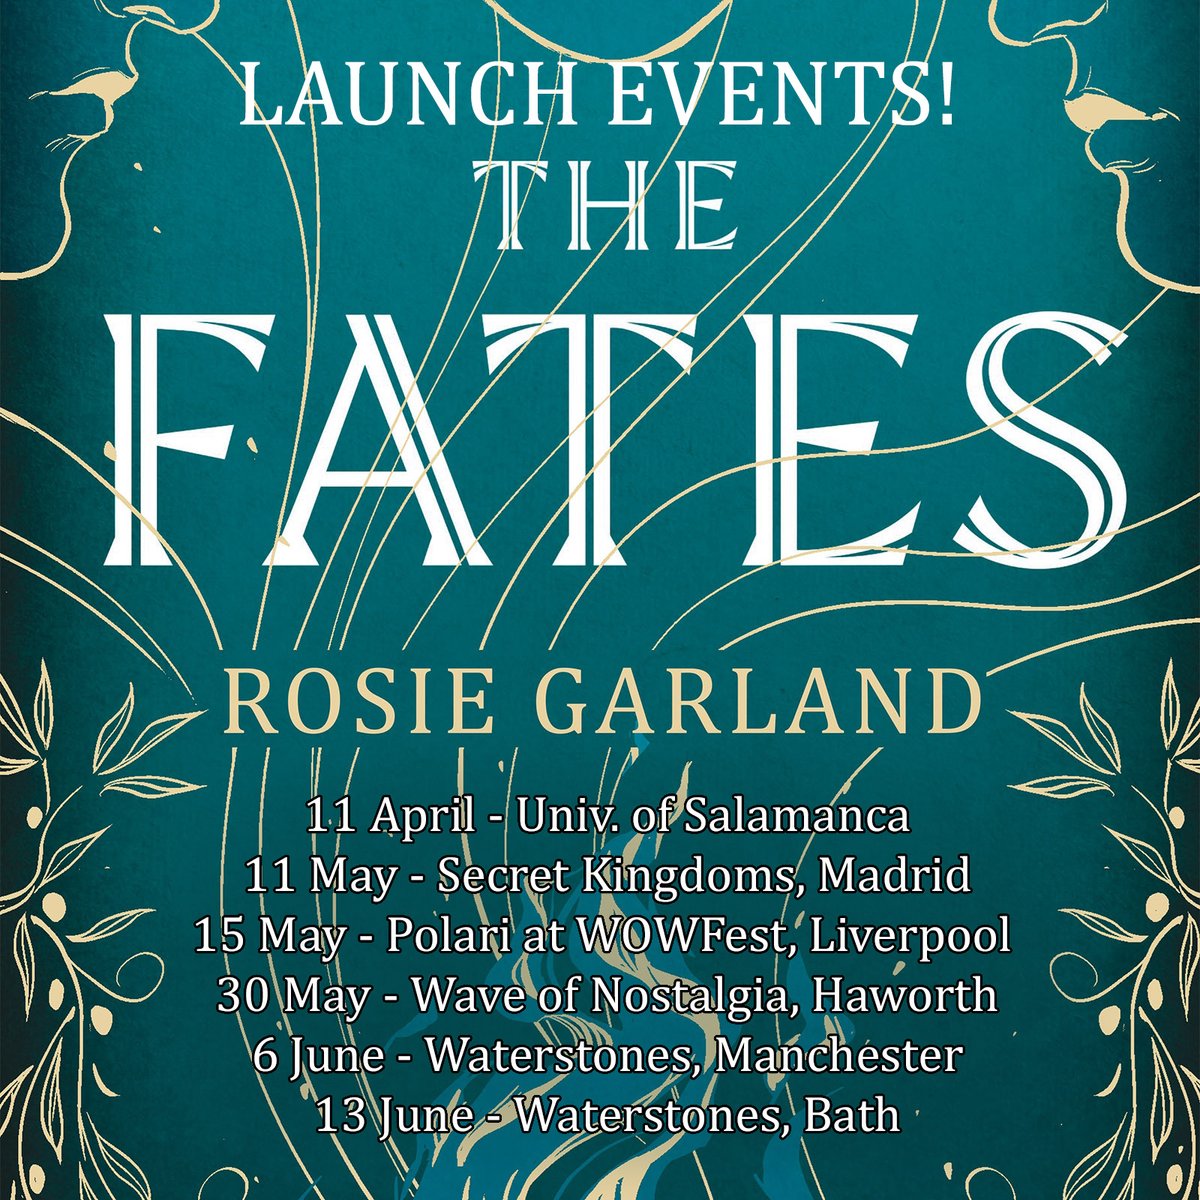 It’s publication day for The Fates! And yes – there are launch events... Looking forward to seeing you! You KNOW you want to😊 What a feeling🎶 ...plus, the Manchester / Bath events are with none other than the amazing @jennysaint! @QuercusBooks @RMLitAgency